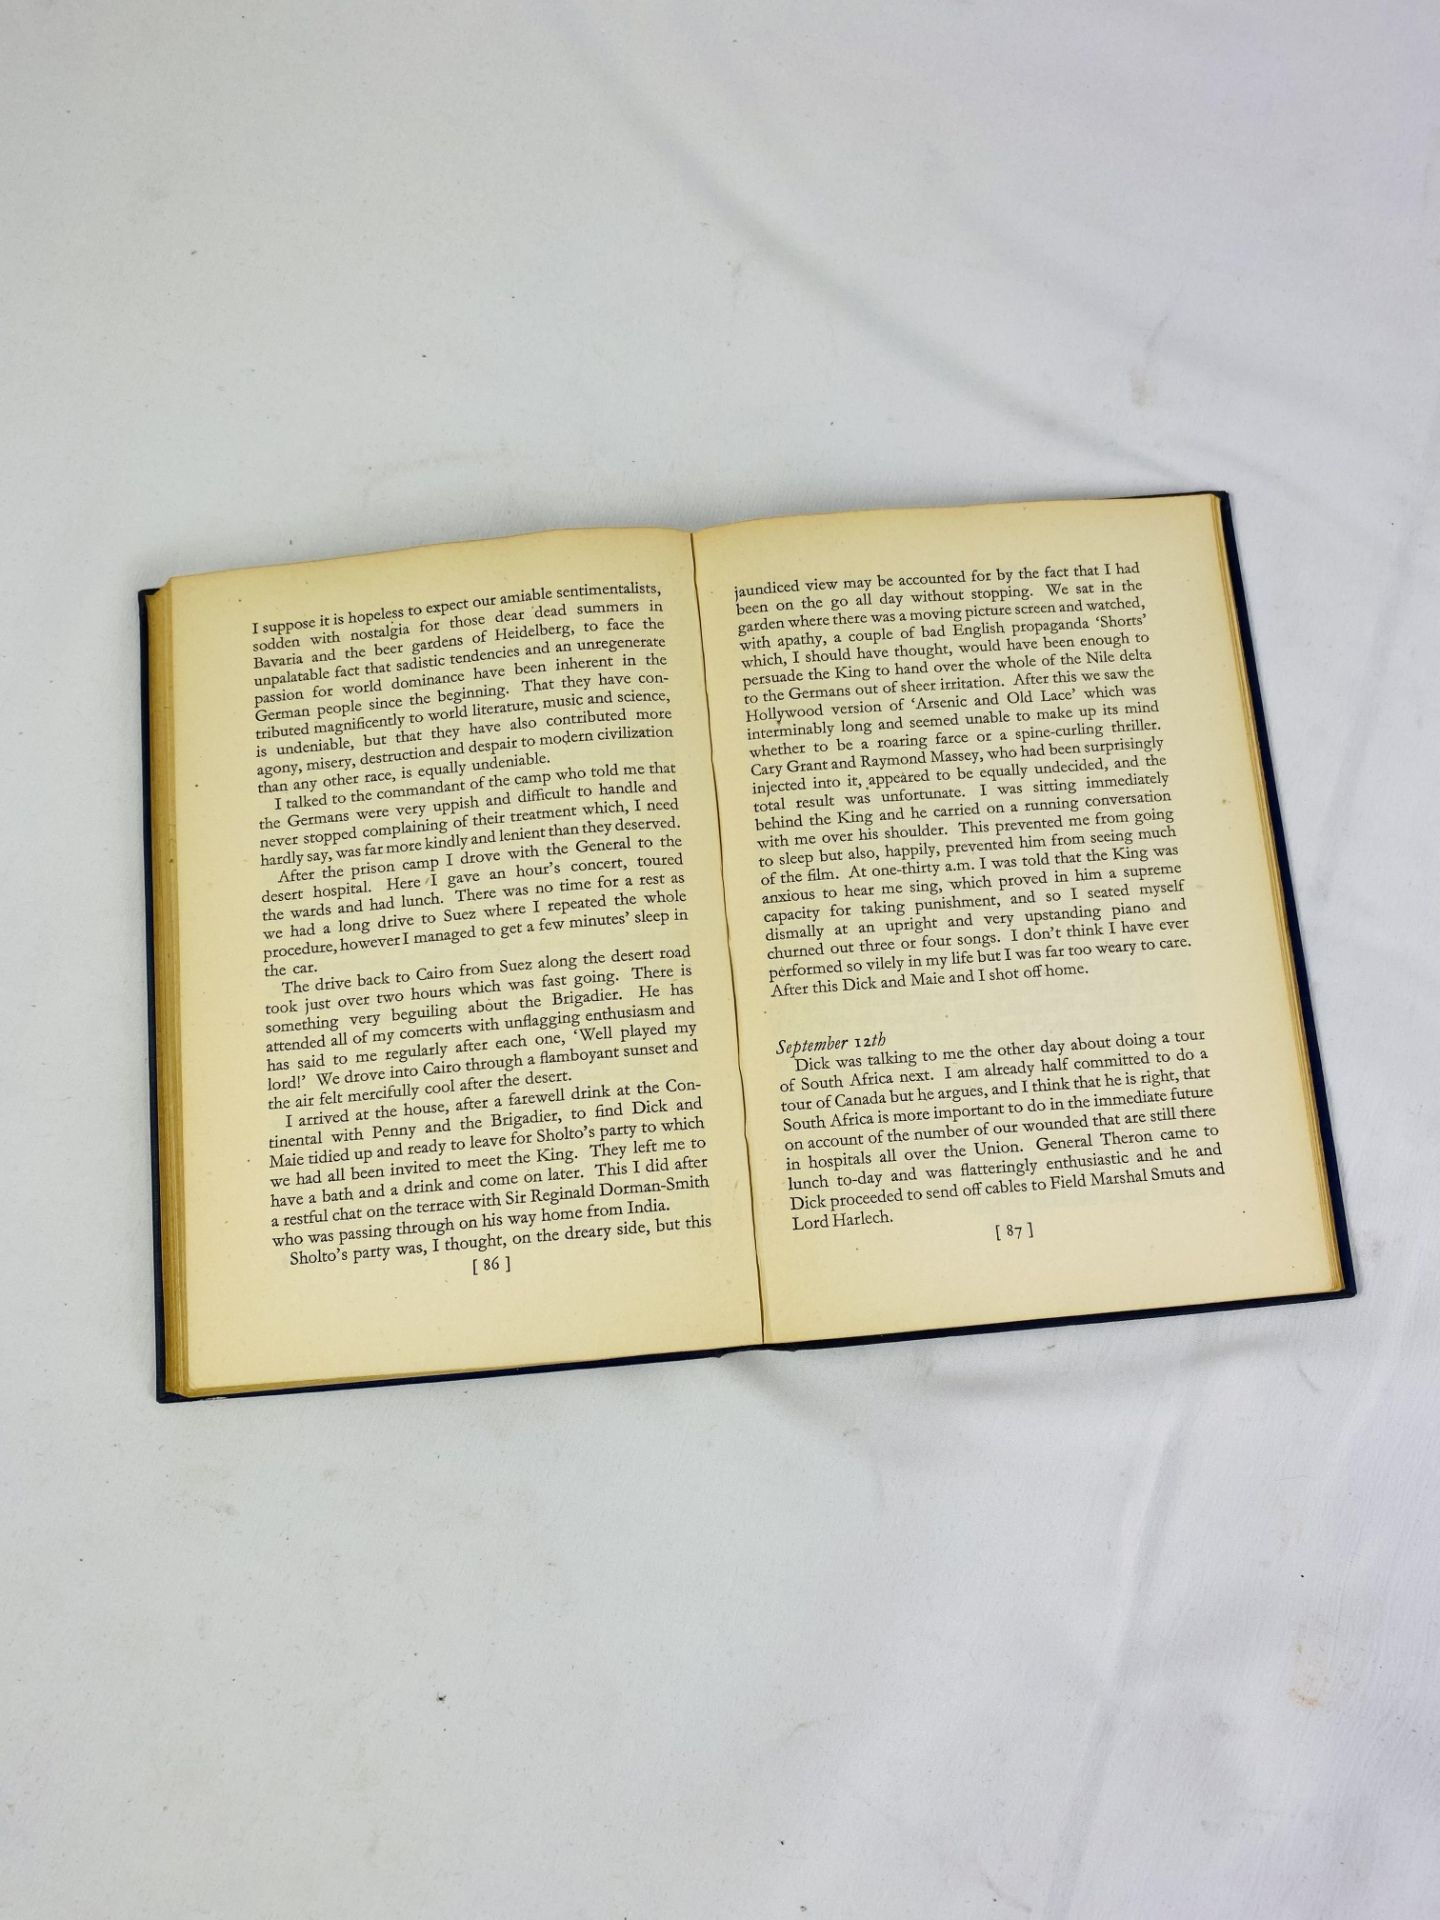 Noel Coward, Middle East Diary, first edition, William Heinemann Ltd, 1944 - Image 7 of 7